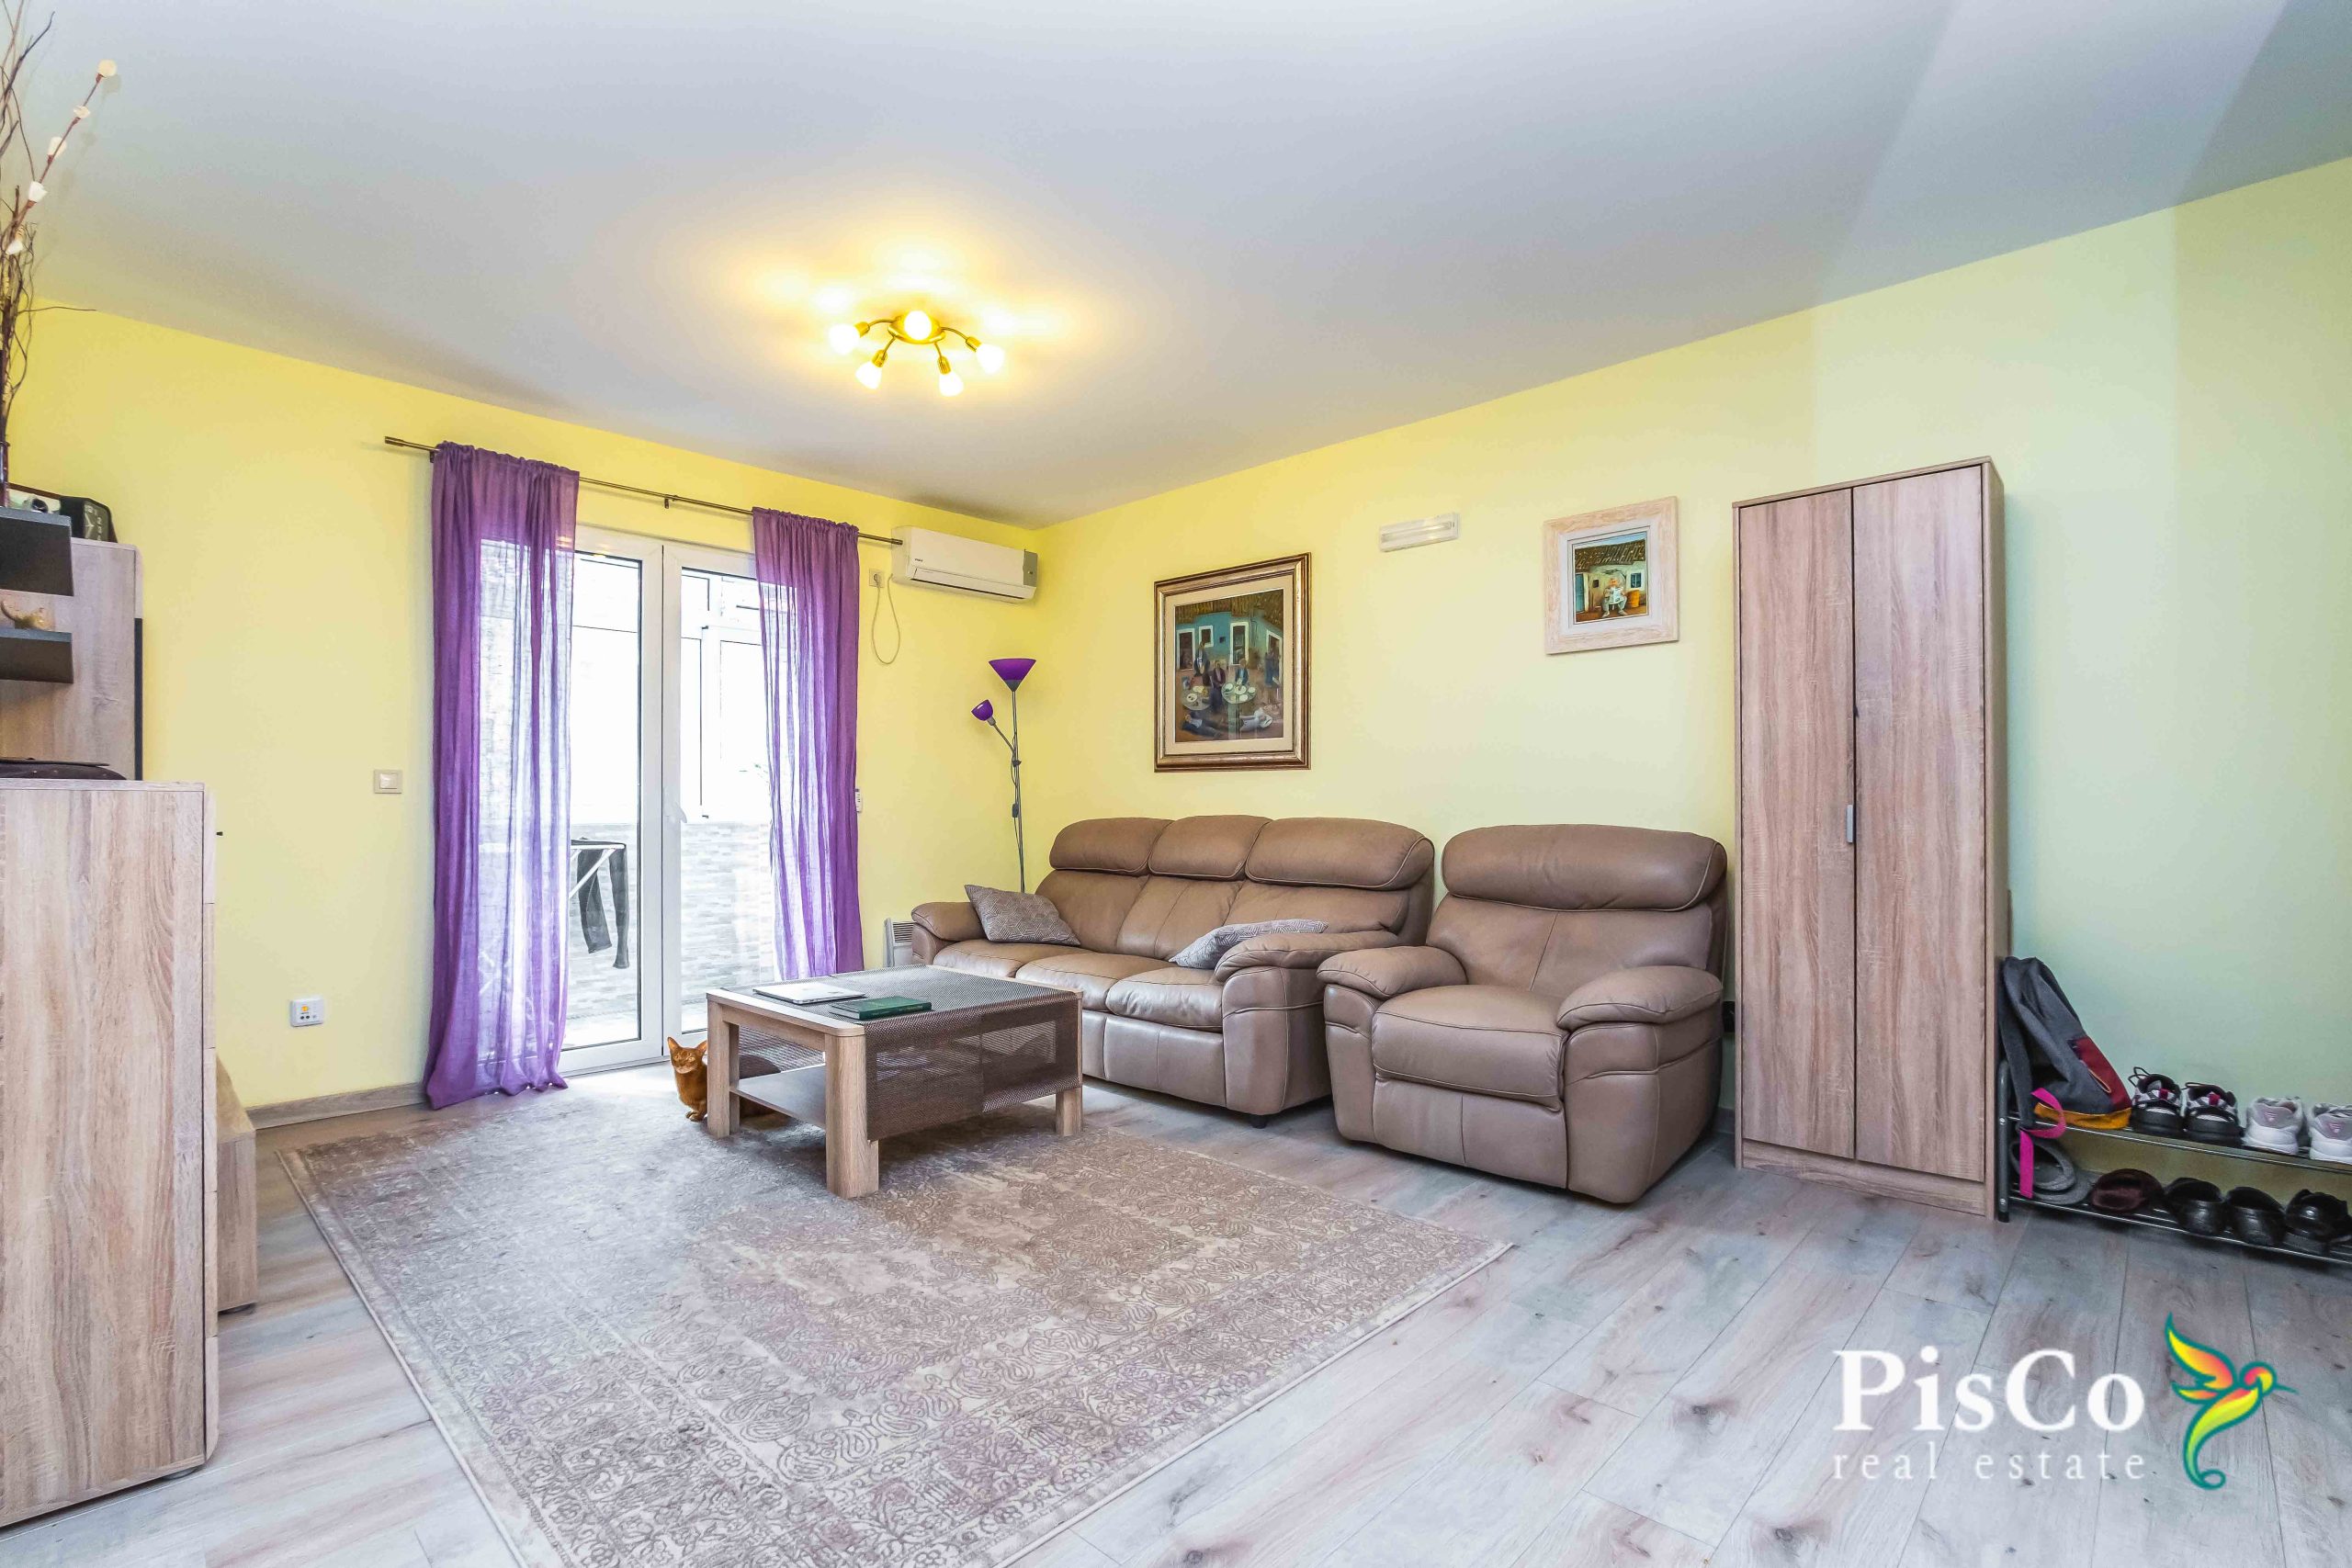 Two bedroom furnished apartment 64m2 for sale in Bečići + two terraces